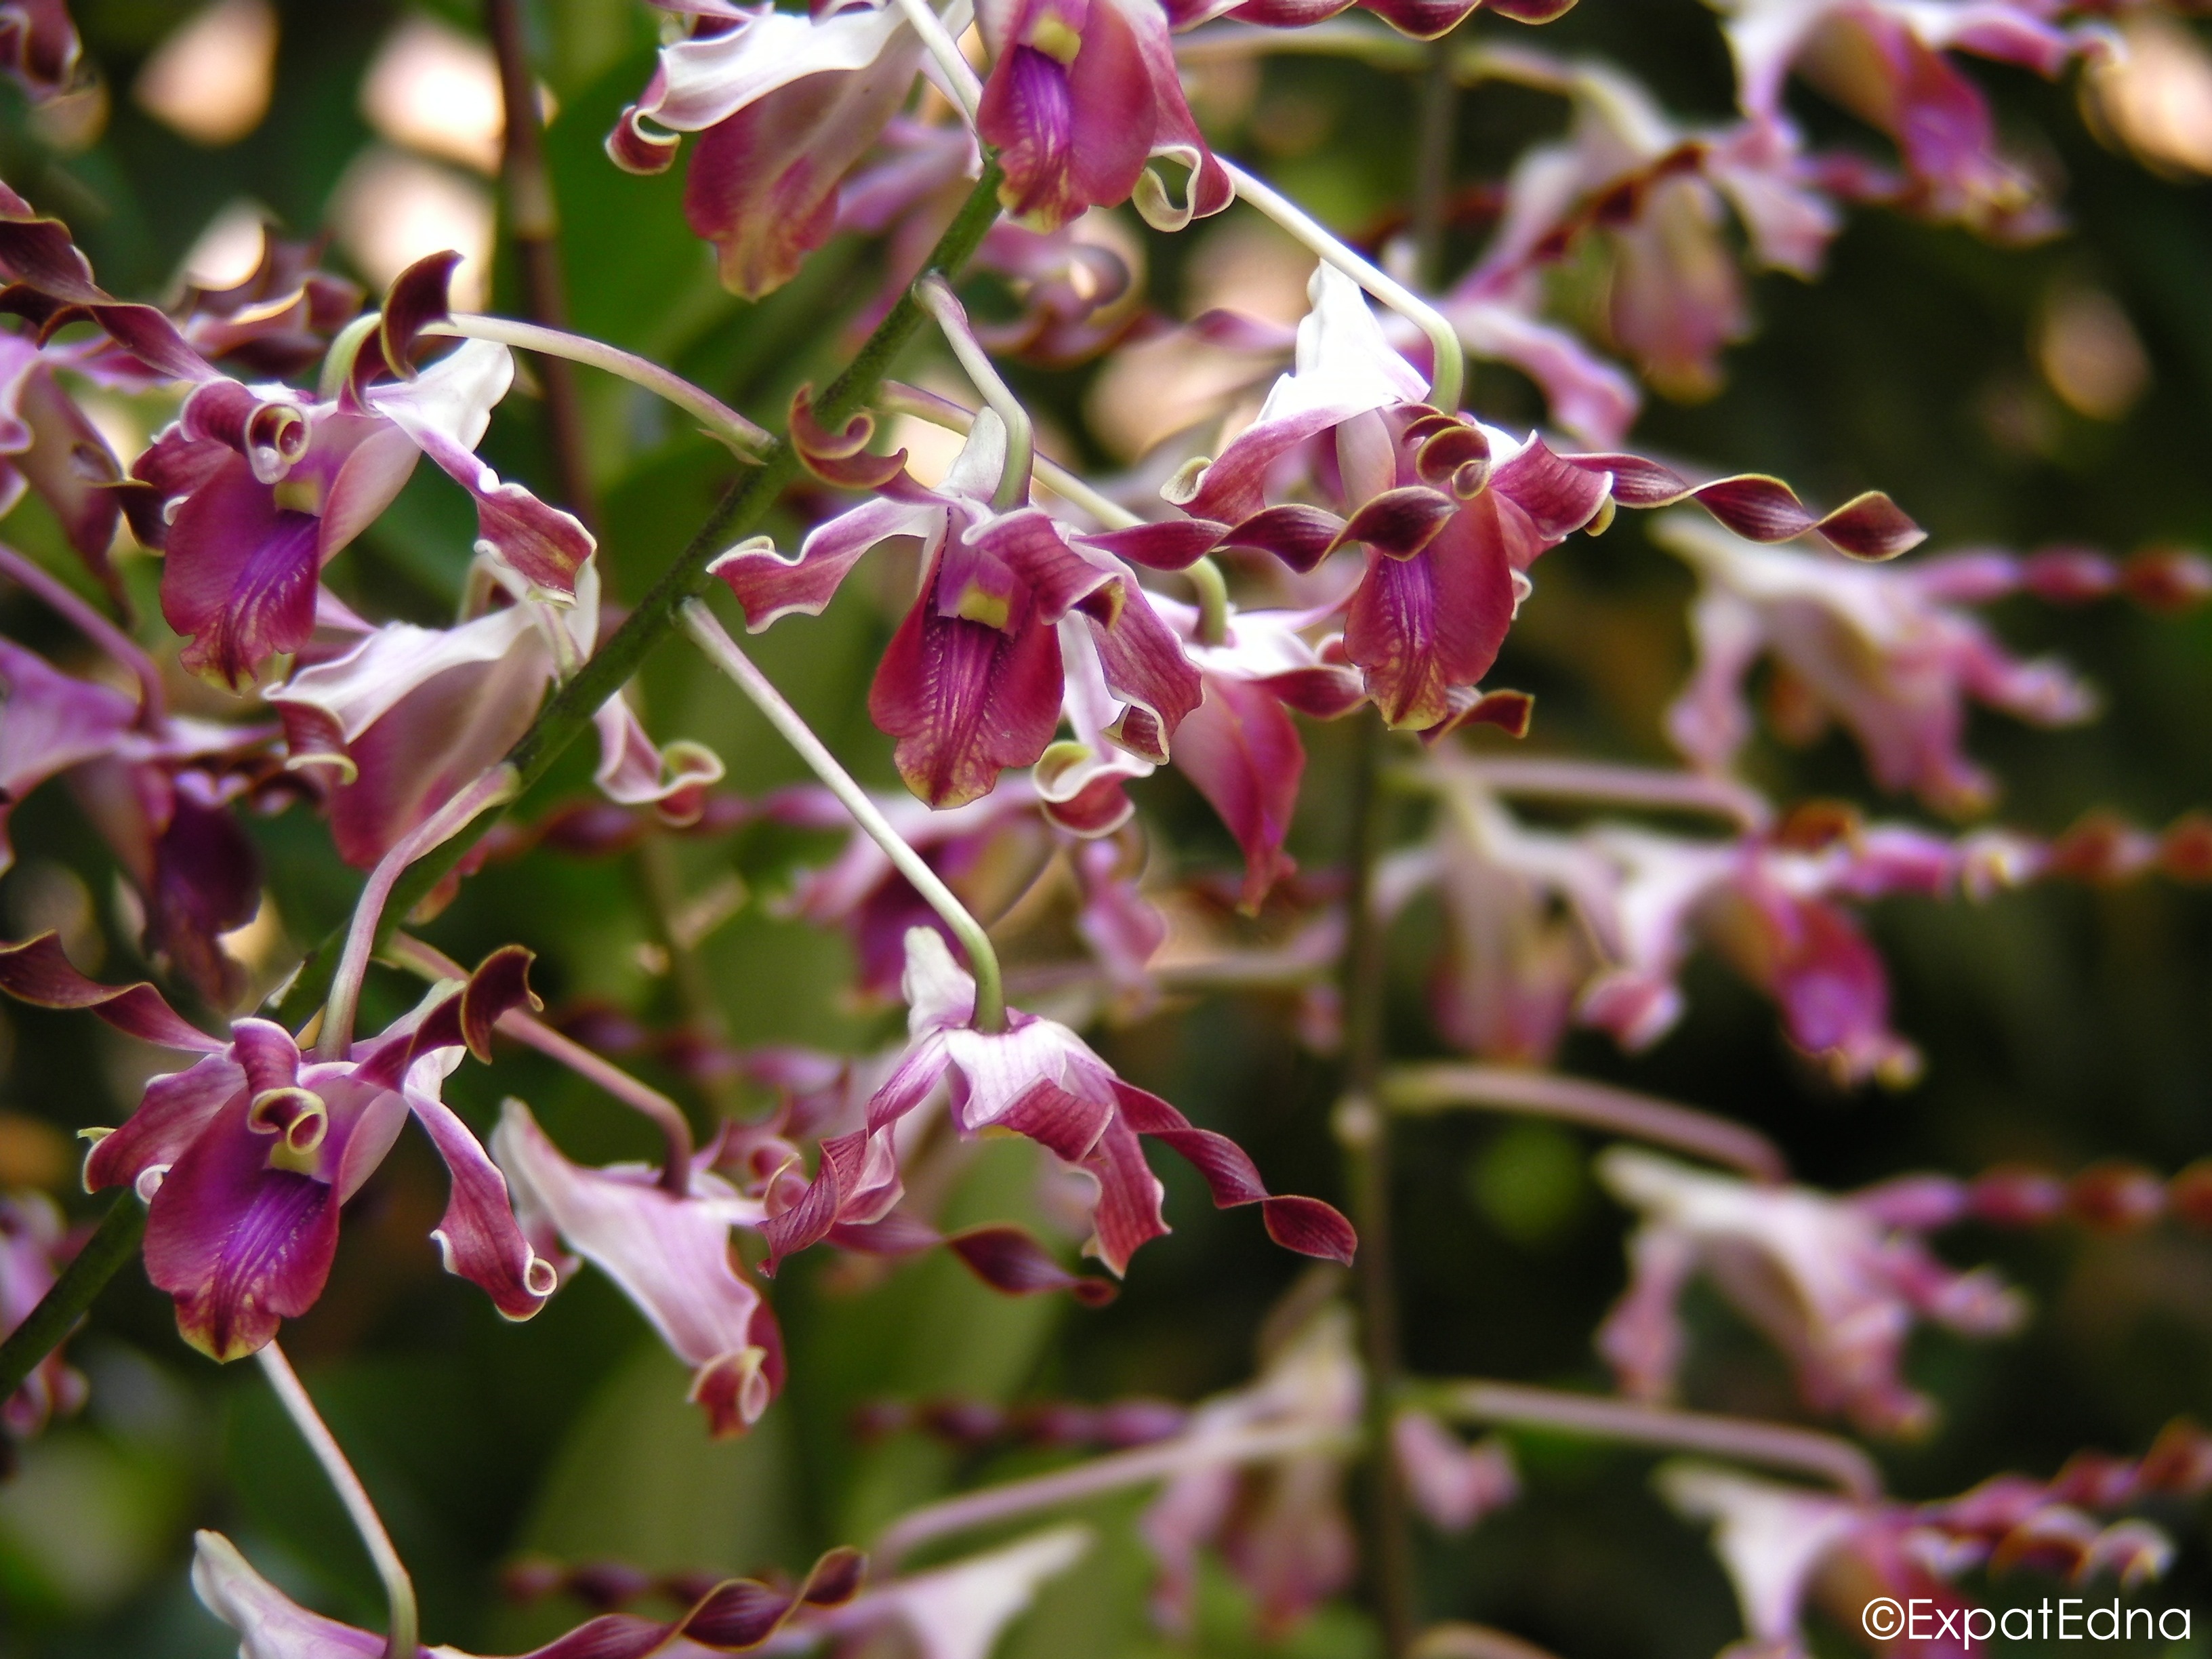 Orchids, Orchids Everywhere: A tour through Singapore's National Orchid